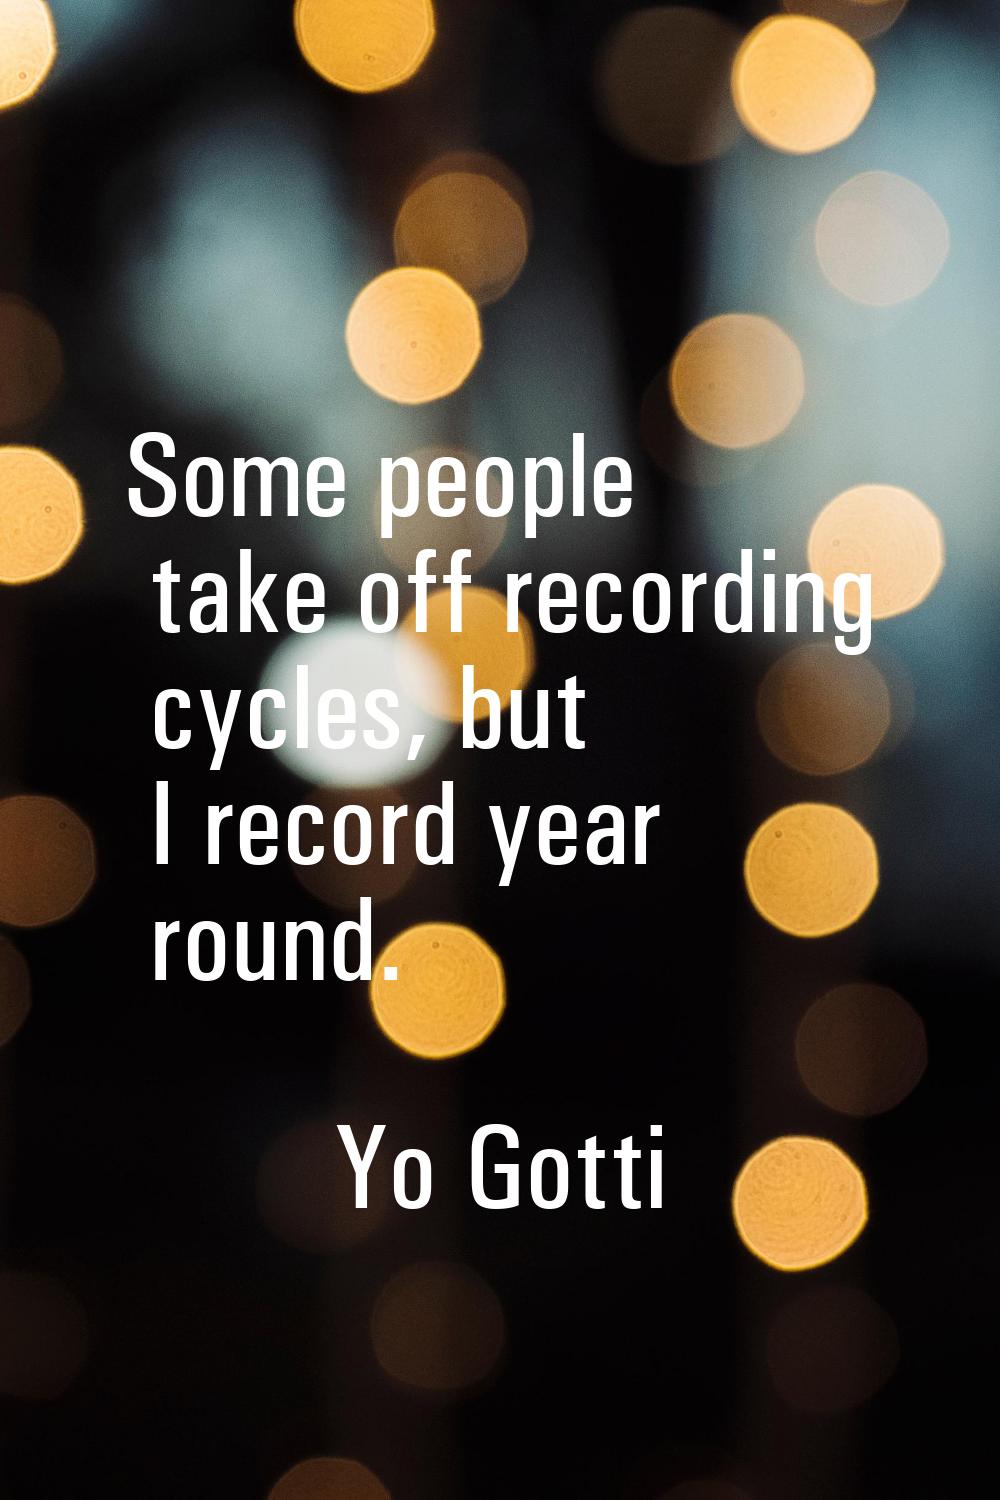 Some people take off recording cycles, but I record year round.